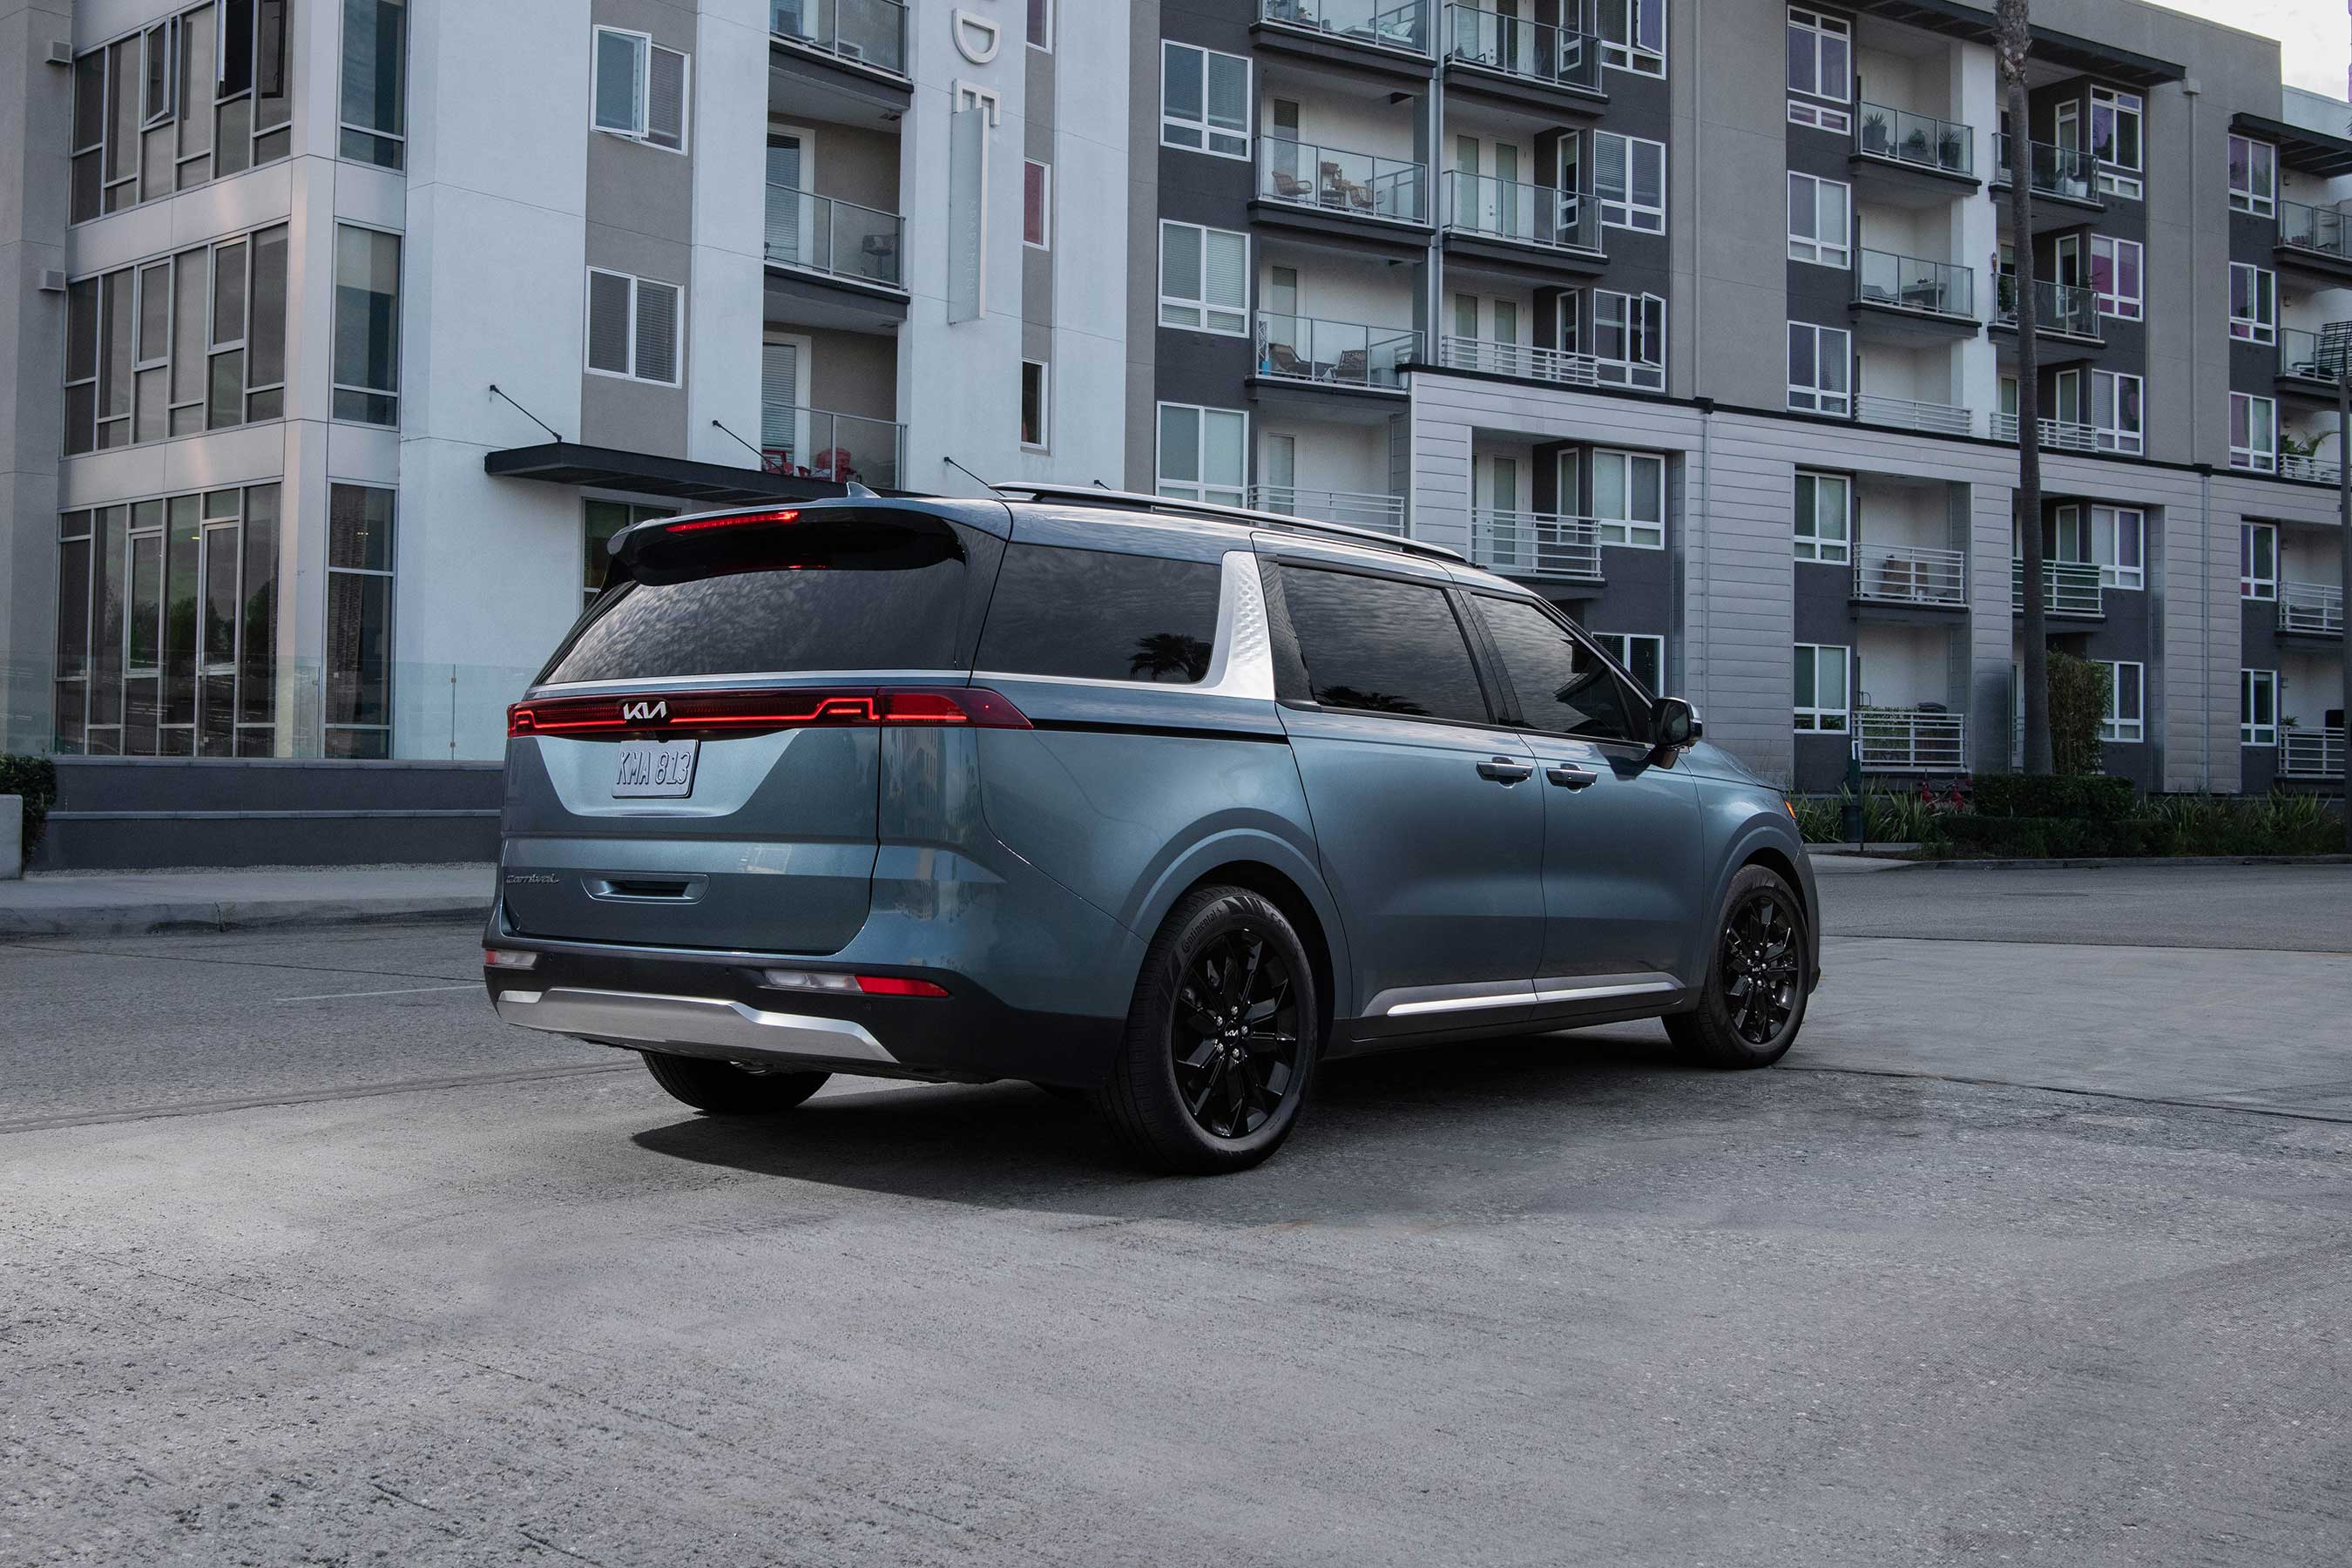 Kia’s all-new 2022 Carnival MPV features a bold and boxy SUV-like design for a commanding presence and was penned at the same studio as the brand’s award-winning Telluride and Sorento SUVs.